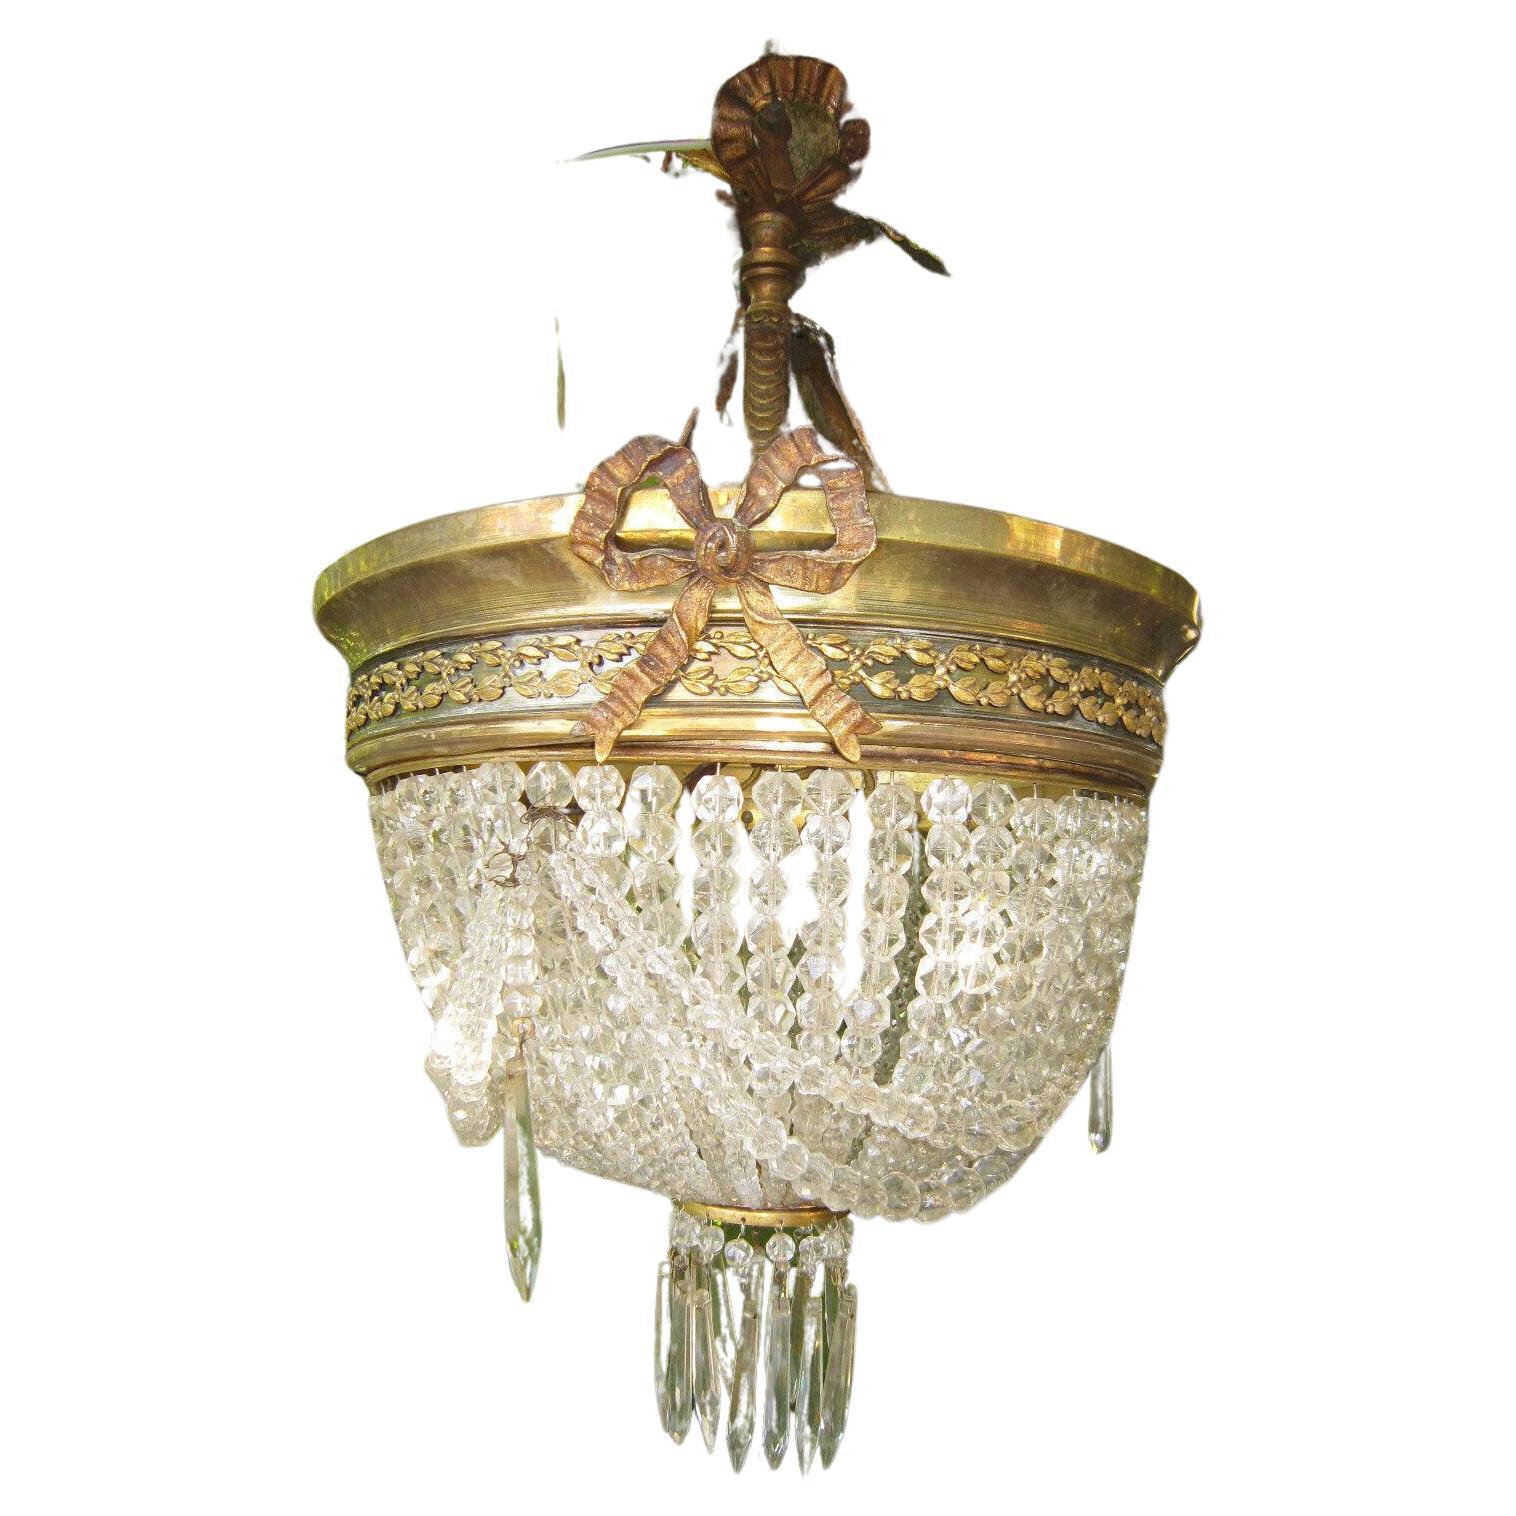 19thc French Louis XV Dore Bronze Cut Crystal Beaded Pendant Lighting Chandelier For Sale